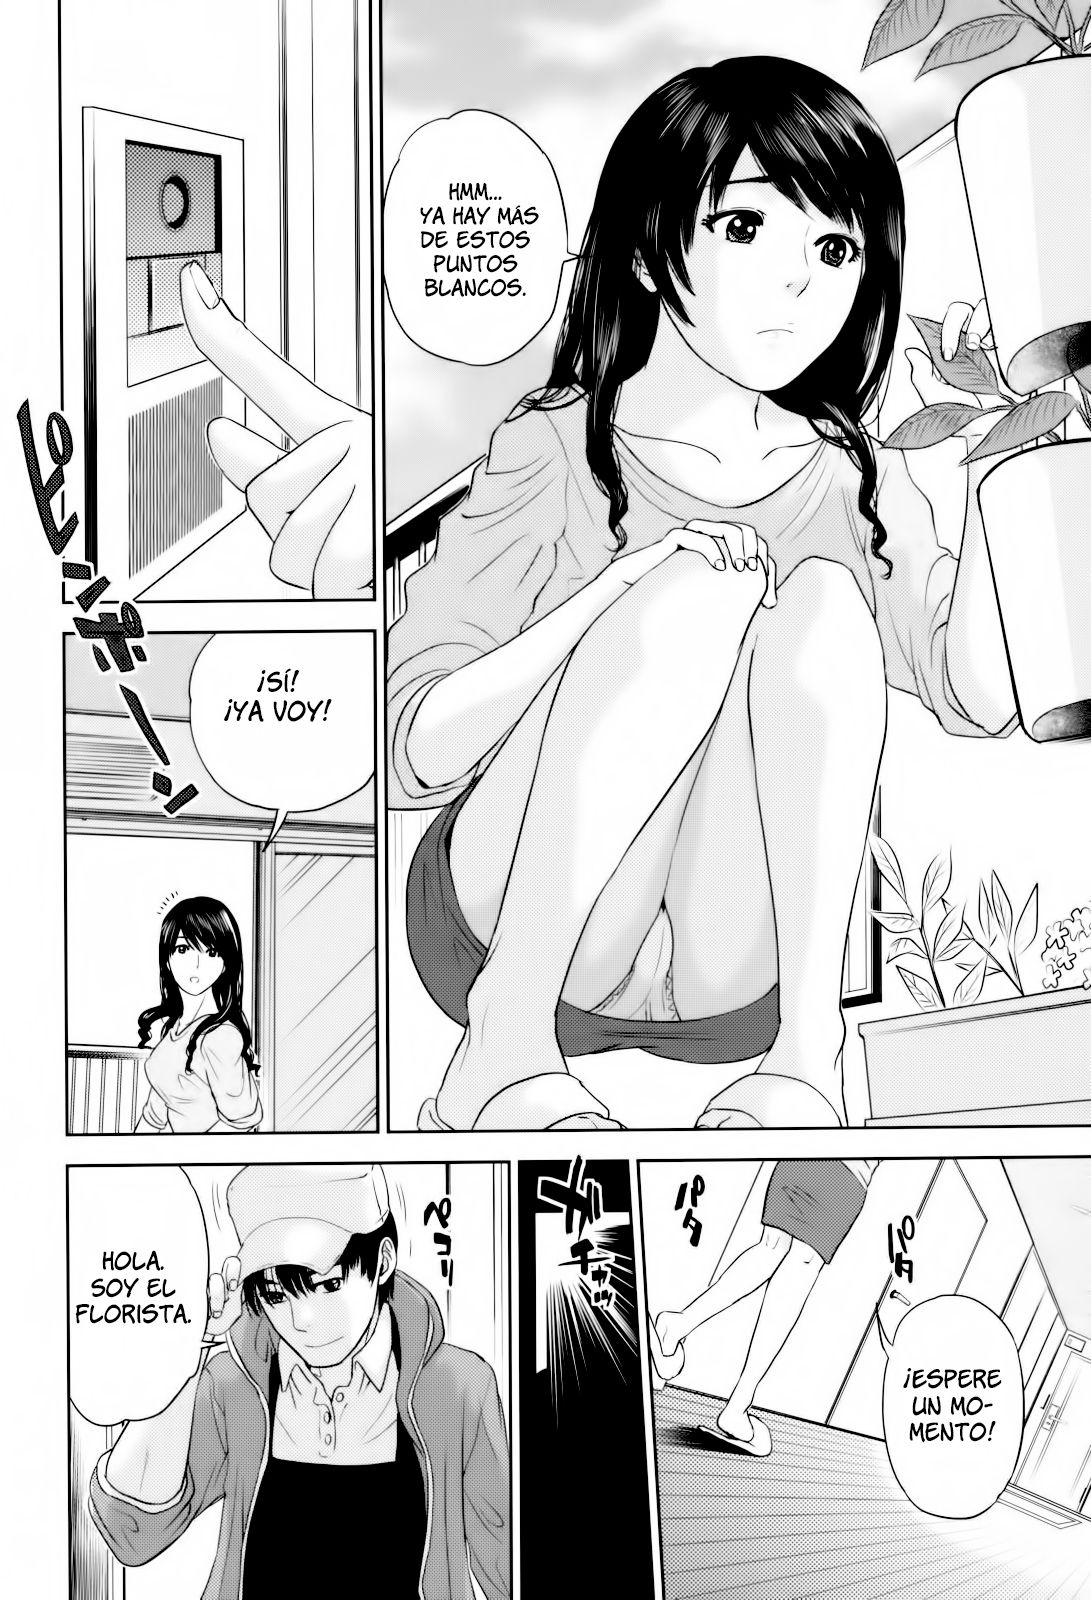 [Tohzai] Okusan to Issho - To be with married woman Ch. 1-5 [Spanish] [RaisserScans] [東西] 人妻さんといっしょ♥ 第1-5話 [スペイン翻訳]